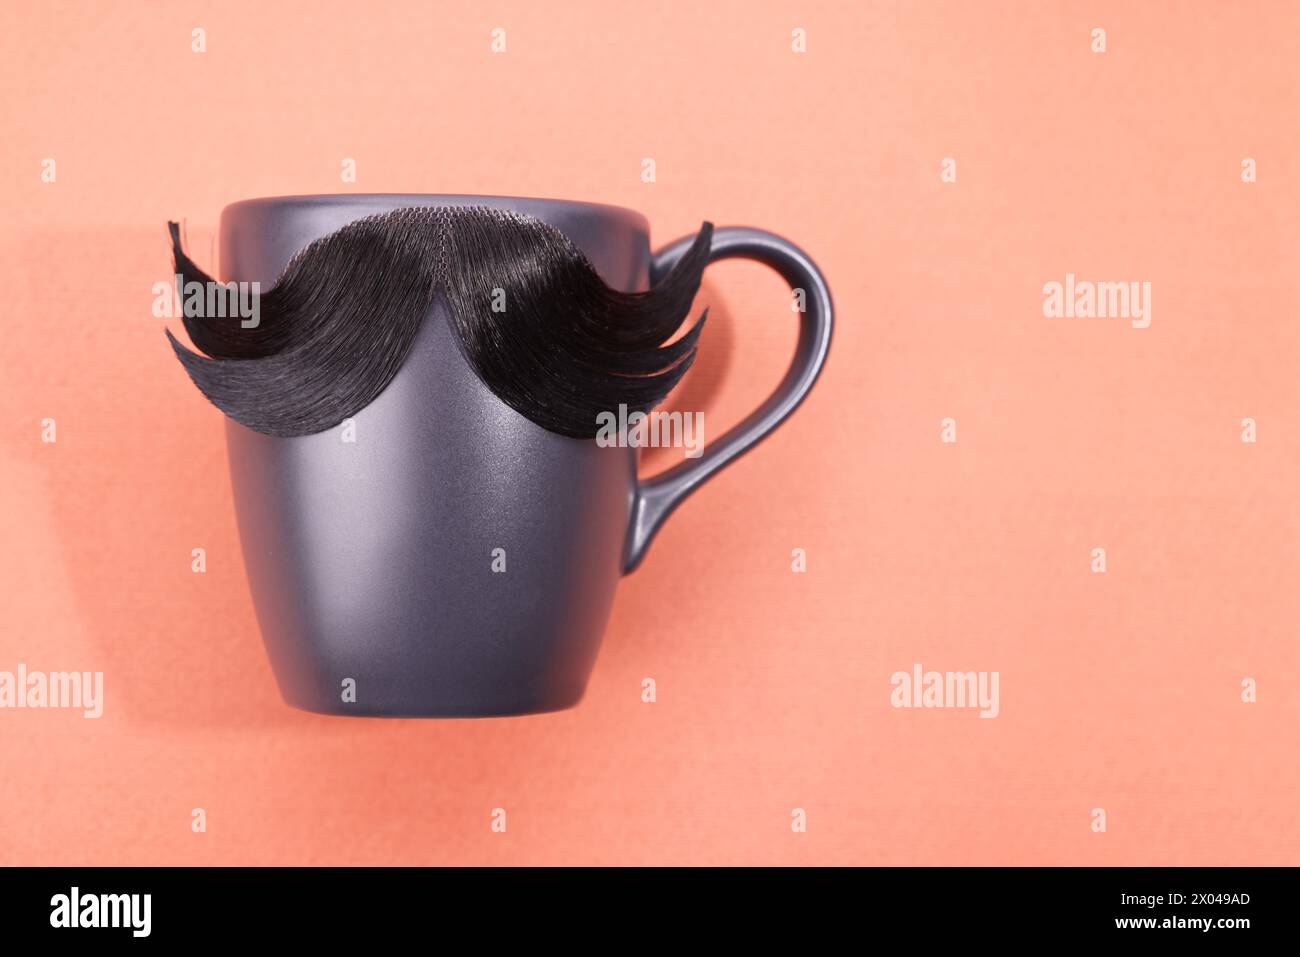 Man's face made of artificial mustache and cup on pink background, top view. Space for text Stock Photo